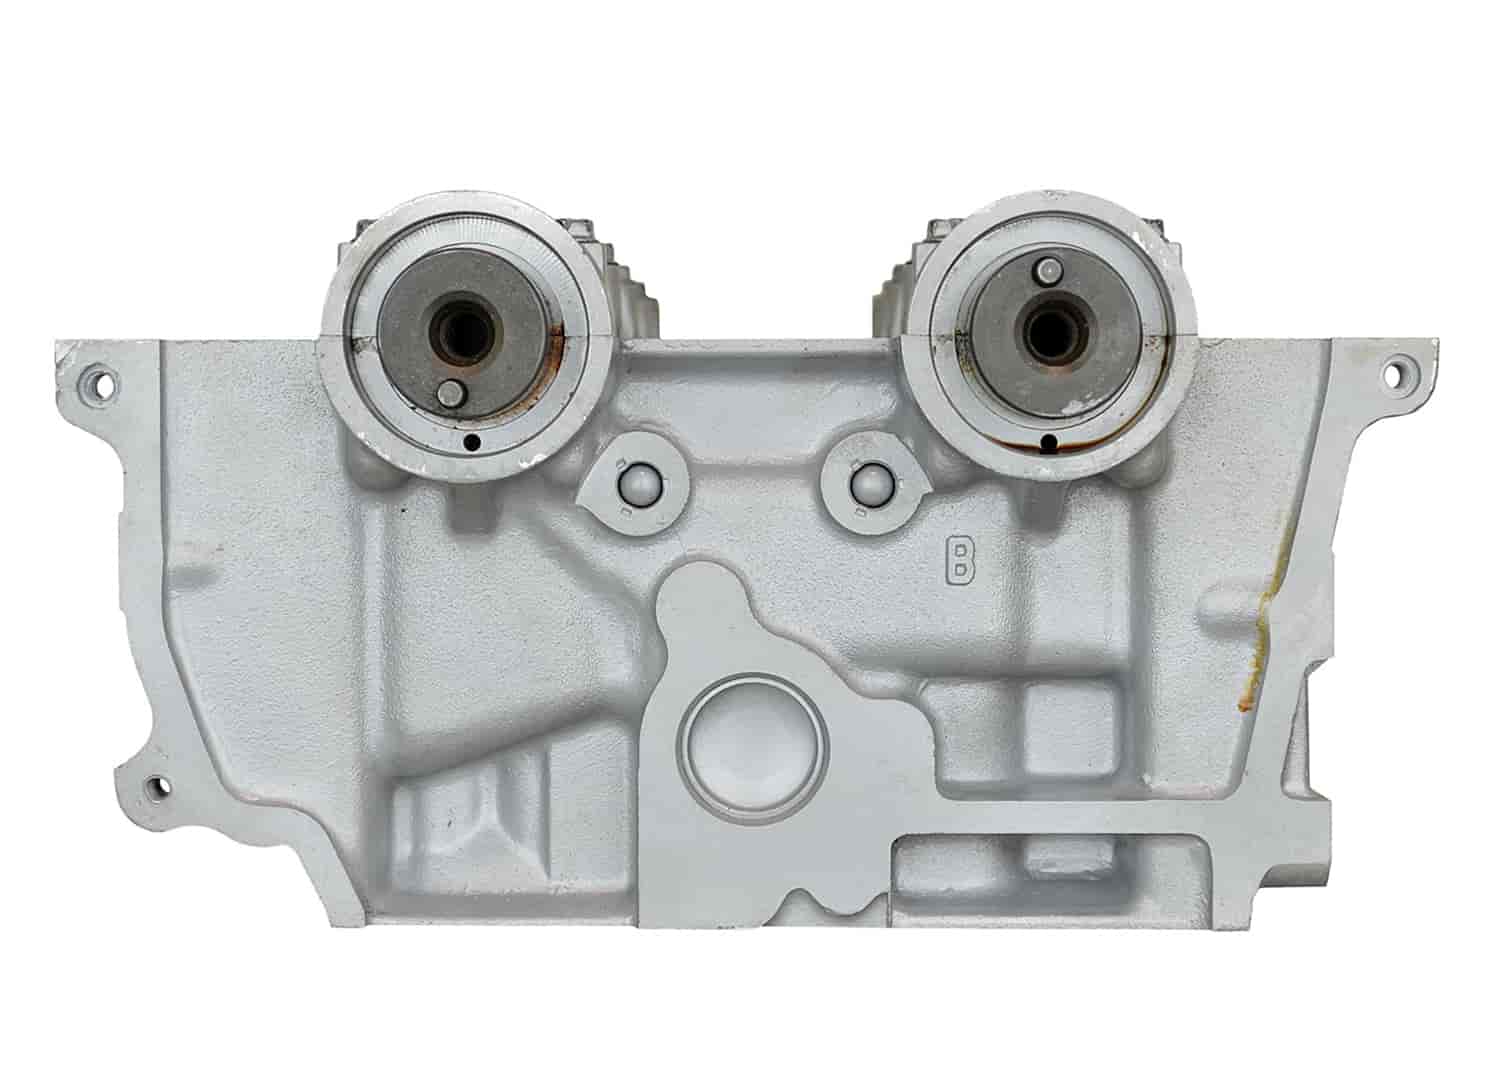 Remanufactured Cylinder Head for 1993-1997 Mazda/Ford with 2.0L L4